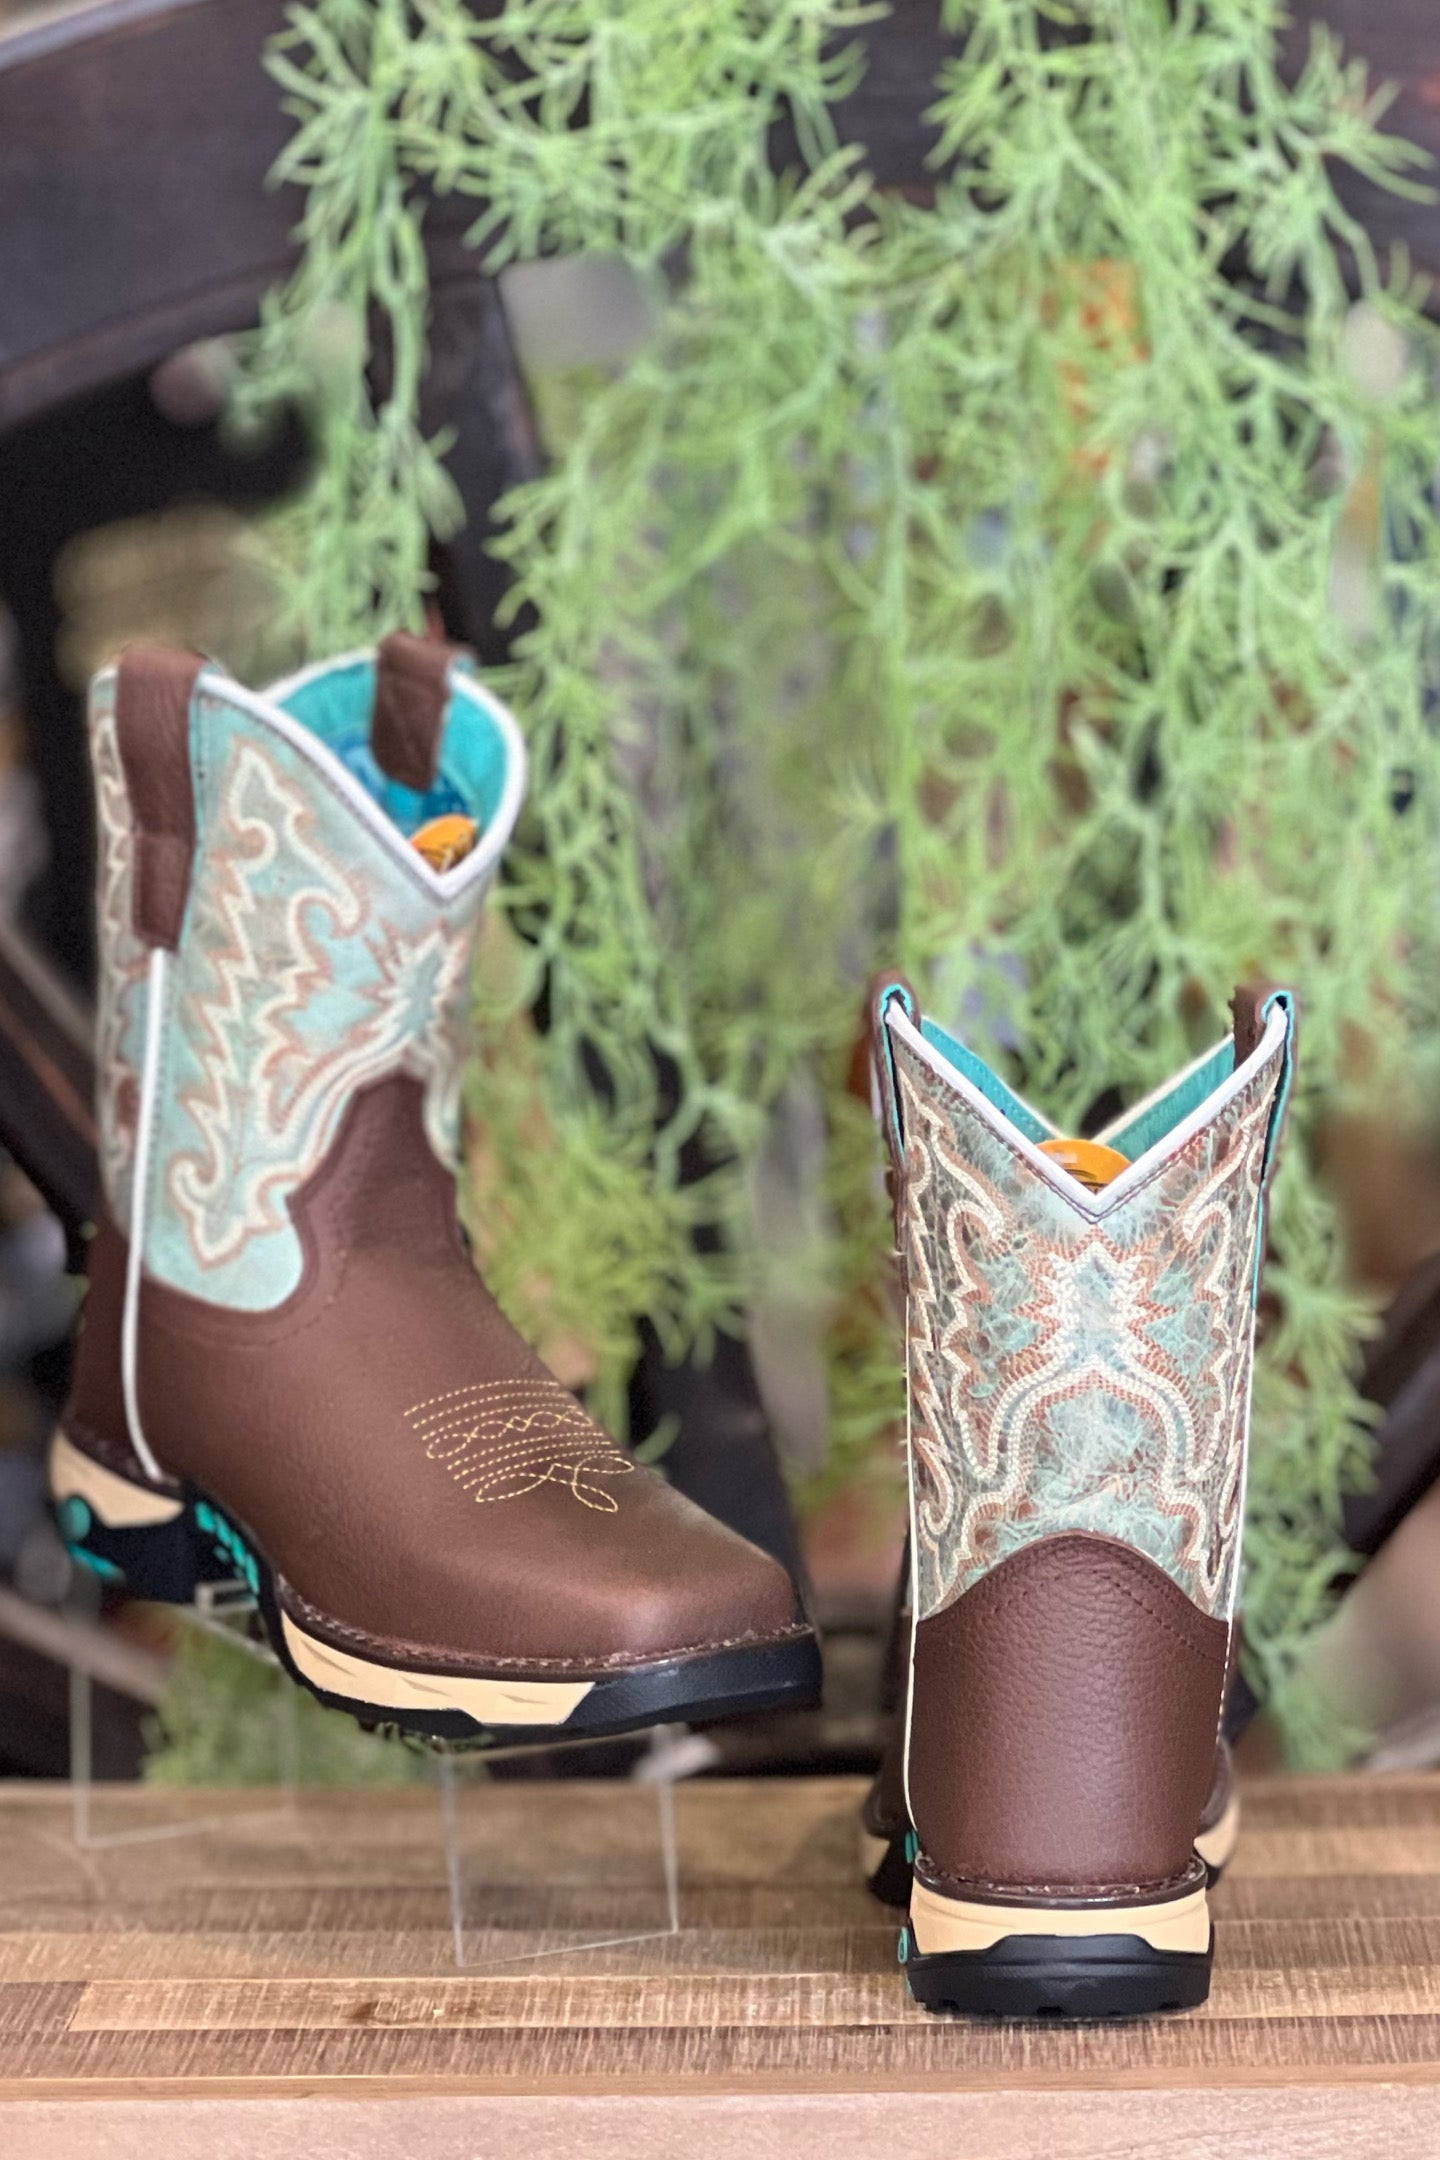 Corral Ladies Farm & Ranch Mint & Brown Square Toe Work Boots-Ladies Boot-Corral Boots/Circle G by Corral Boots-Gallop 'n Glitz- Women's Western Wear Boutique, Located in Grants Pass, Oregon